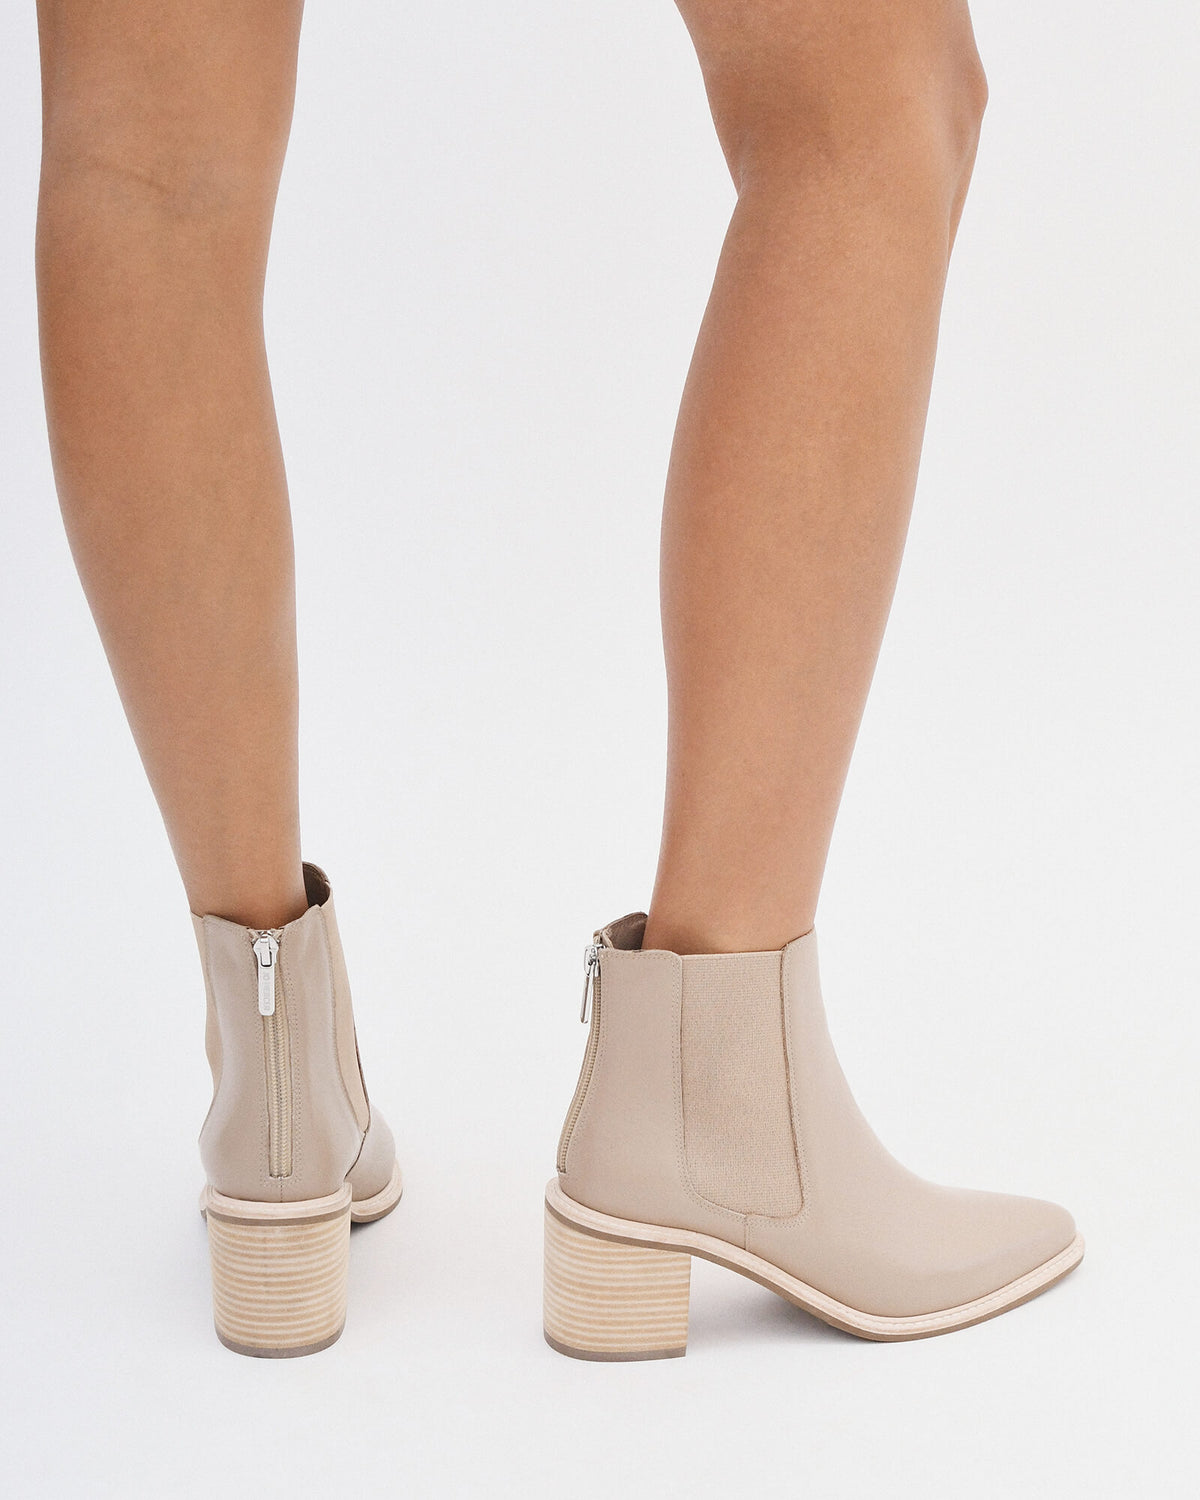 ALLURE MID ANKLE BOOTS TAUPE LEATHER